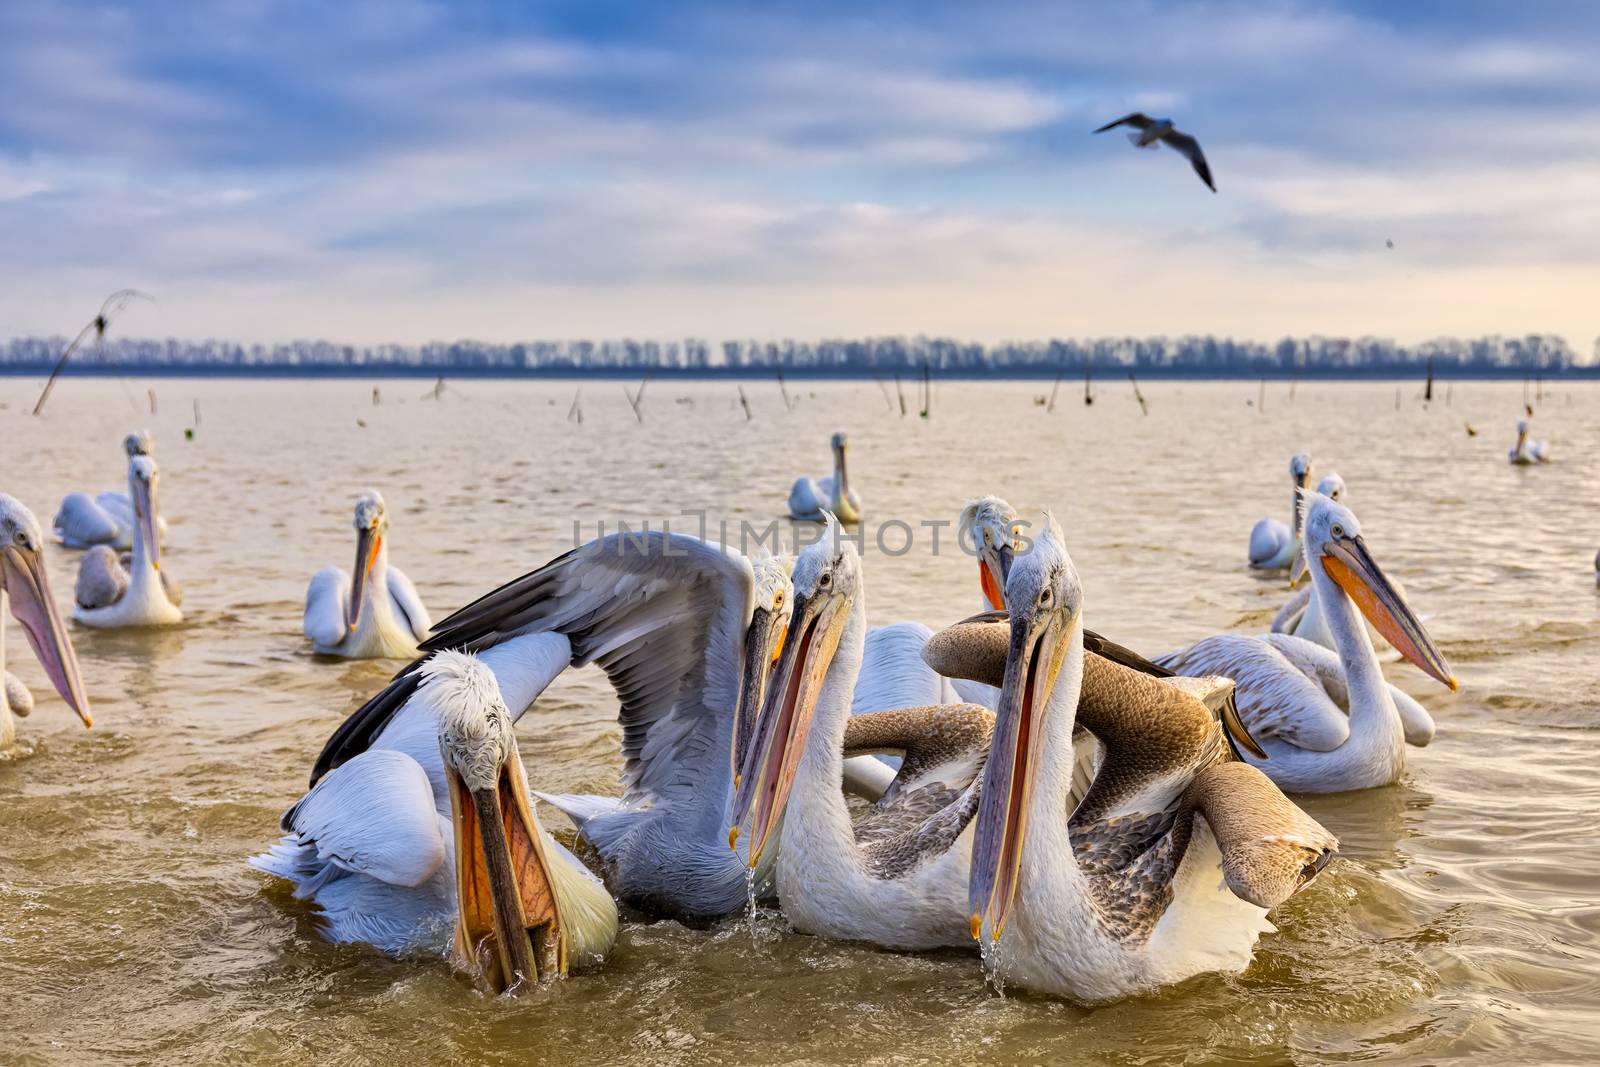 pelican "Dalmatian" opens his mouth and catches the fish that a fisherman threw at the lake Kerkini, Greece. The fishermen of the area feed the pelicans to help them survive the winter